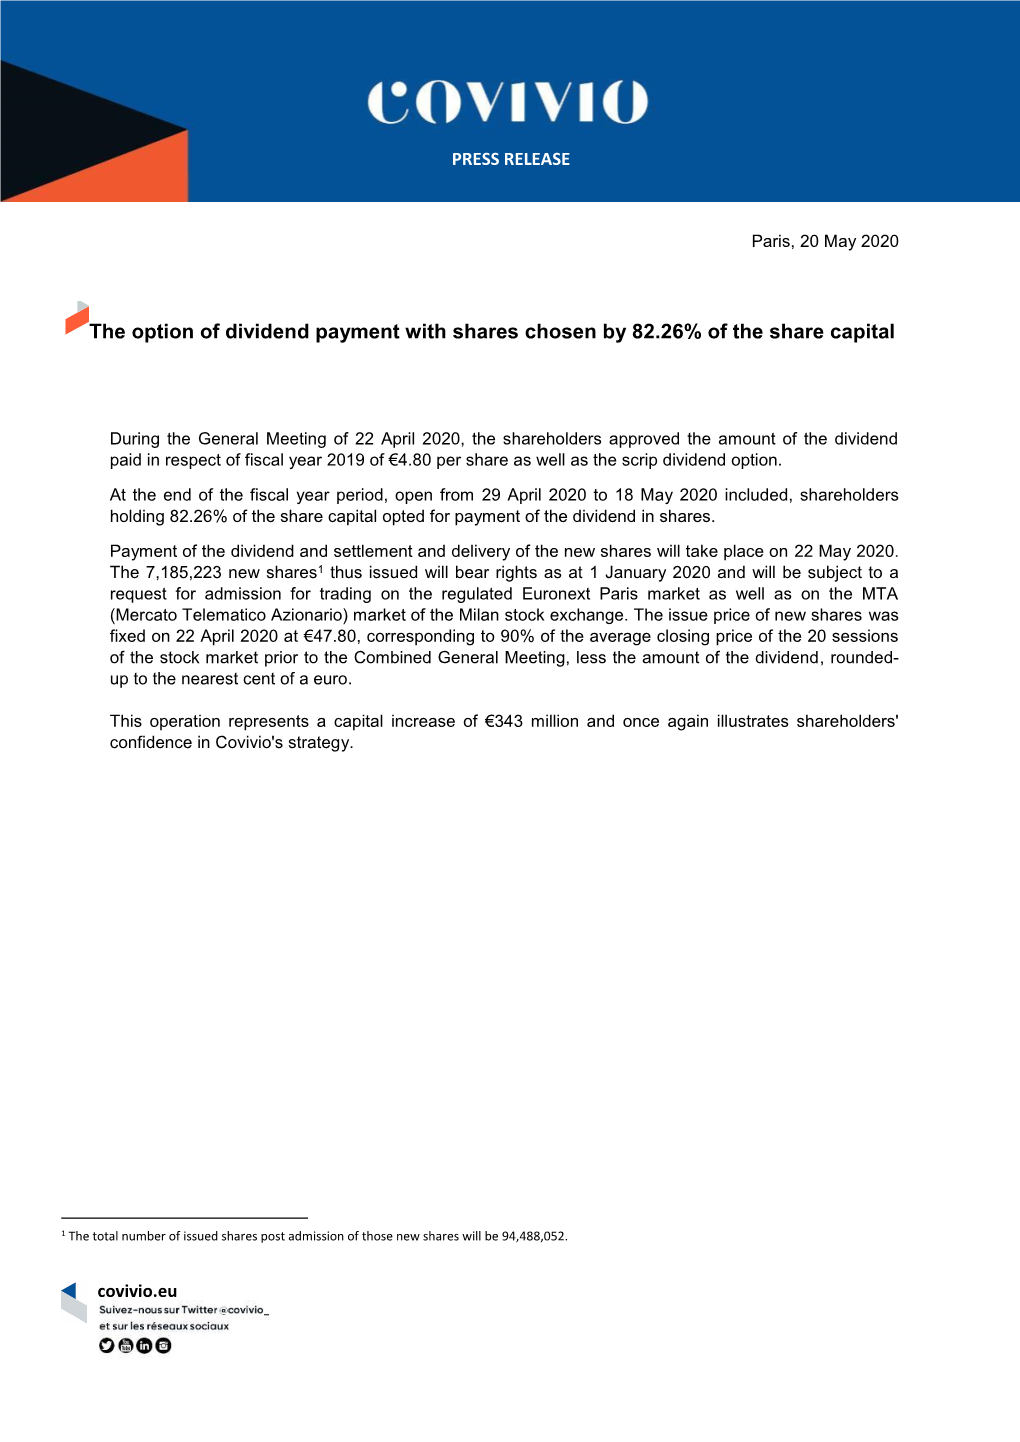 The Option of Dividend Payment with Shares Chosen by 82.26% of the Share Capital